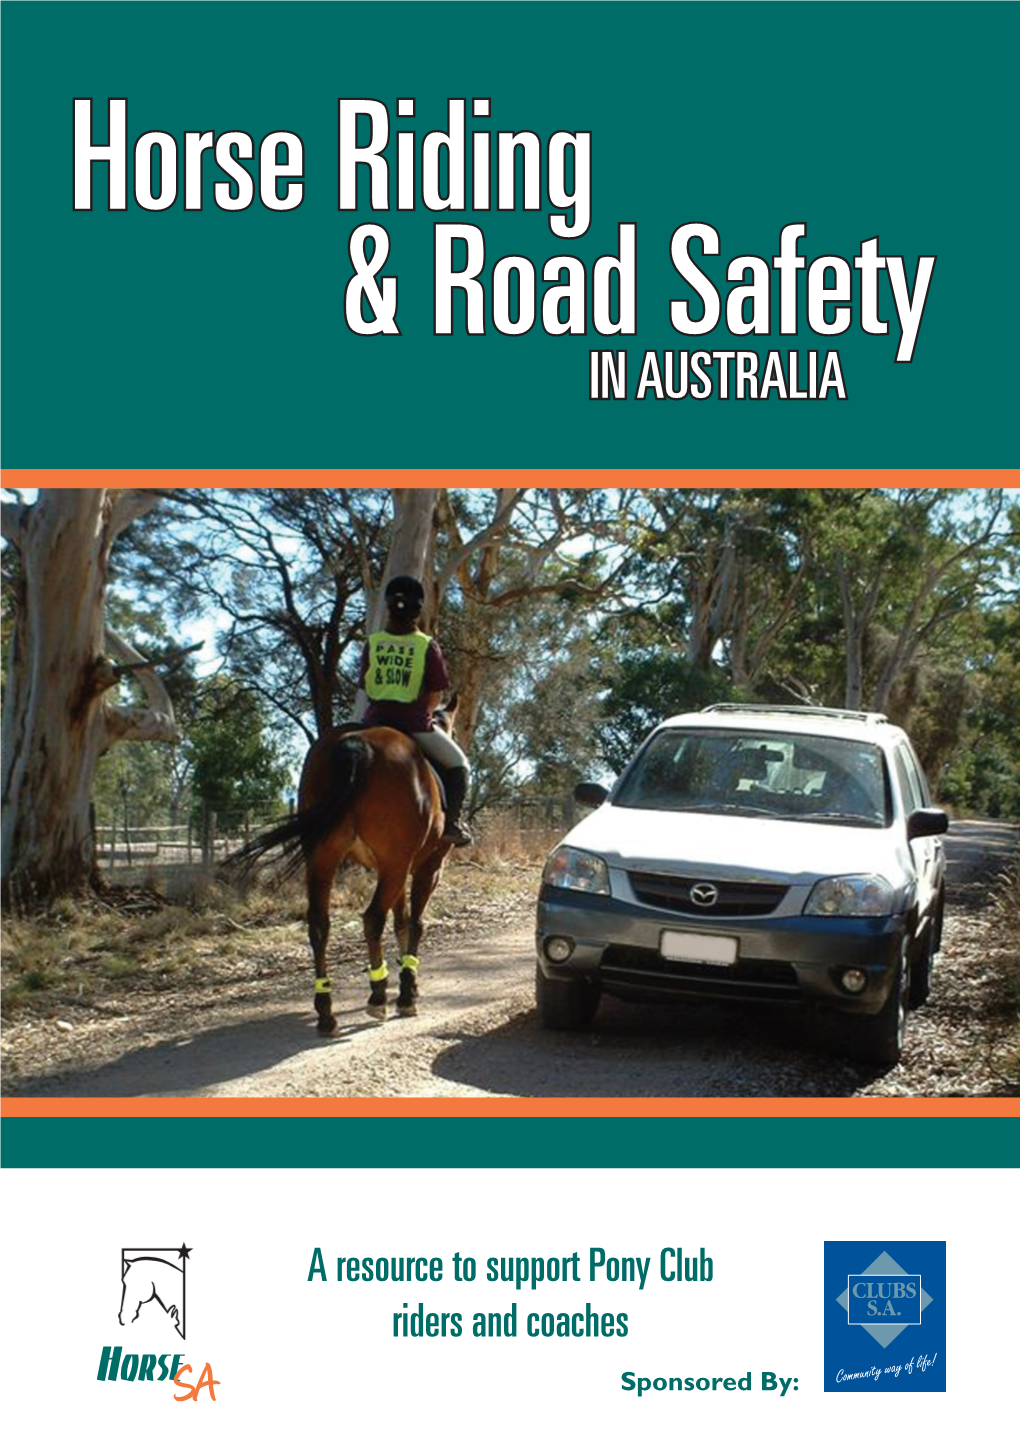 A5 Road Safety Book Edits.Indd